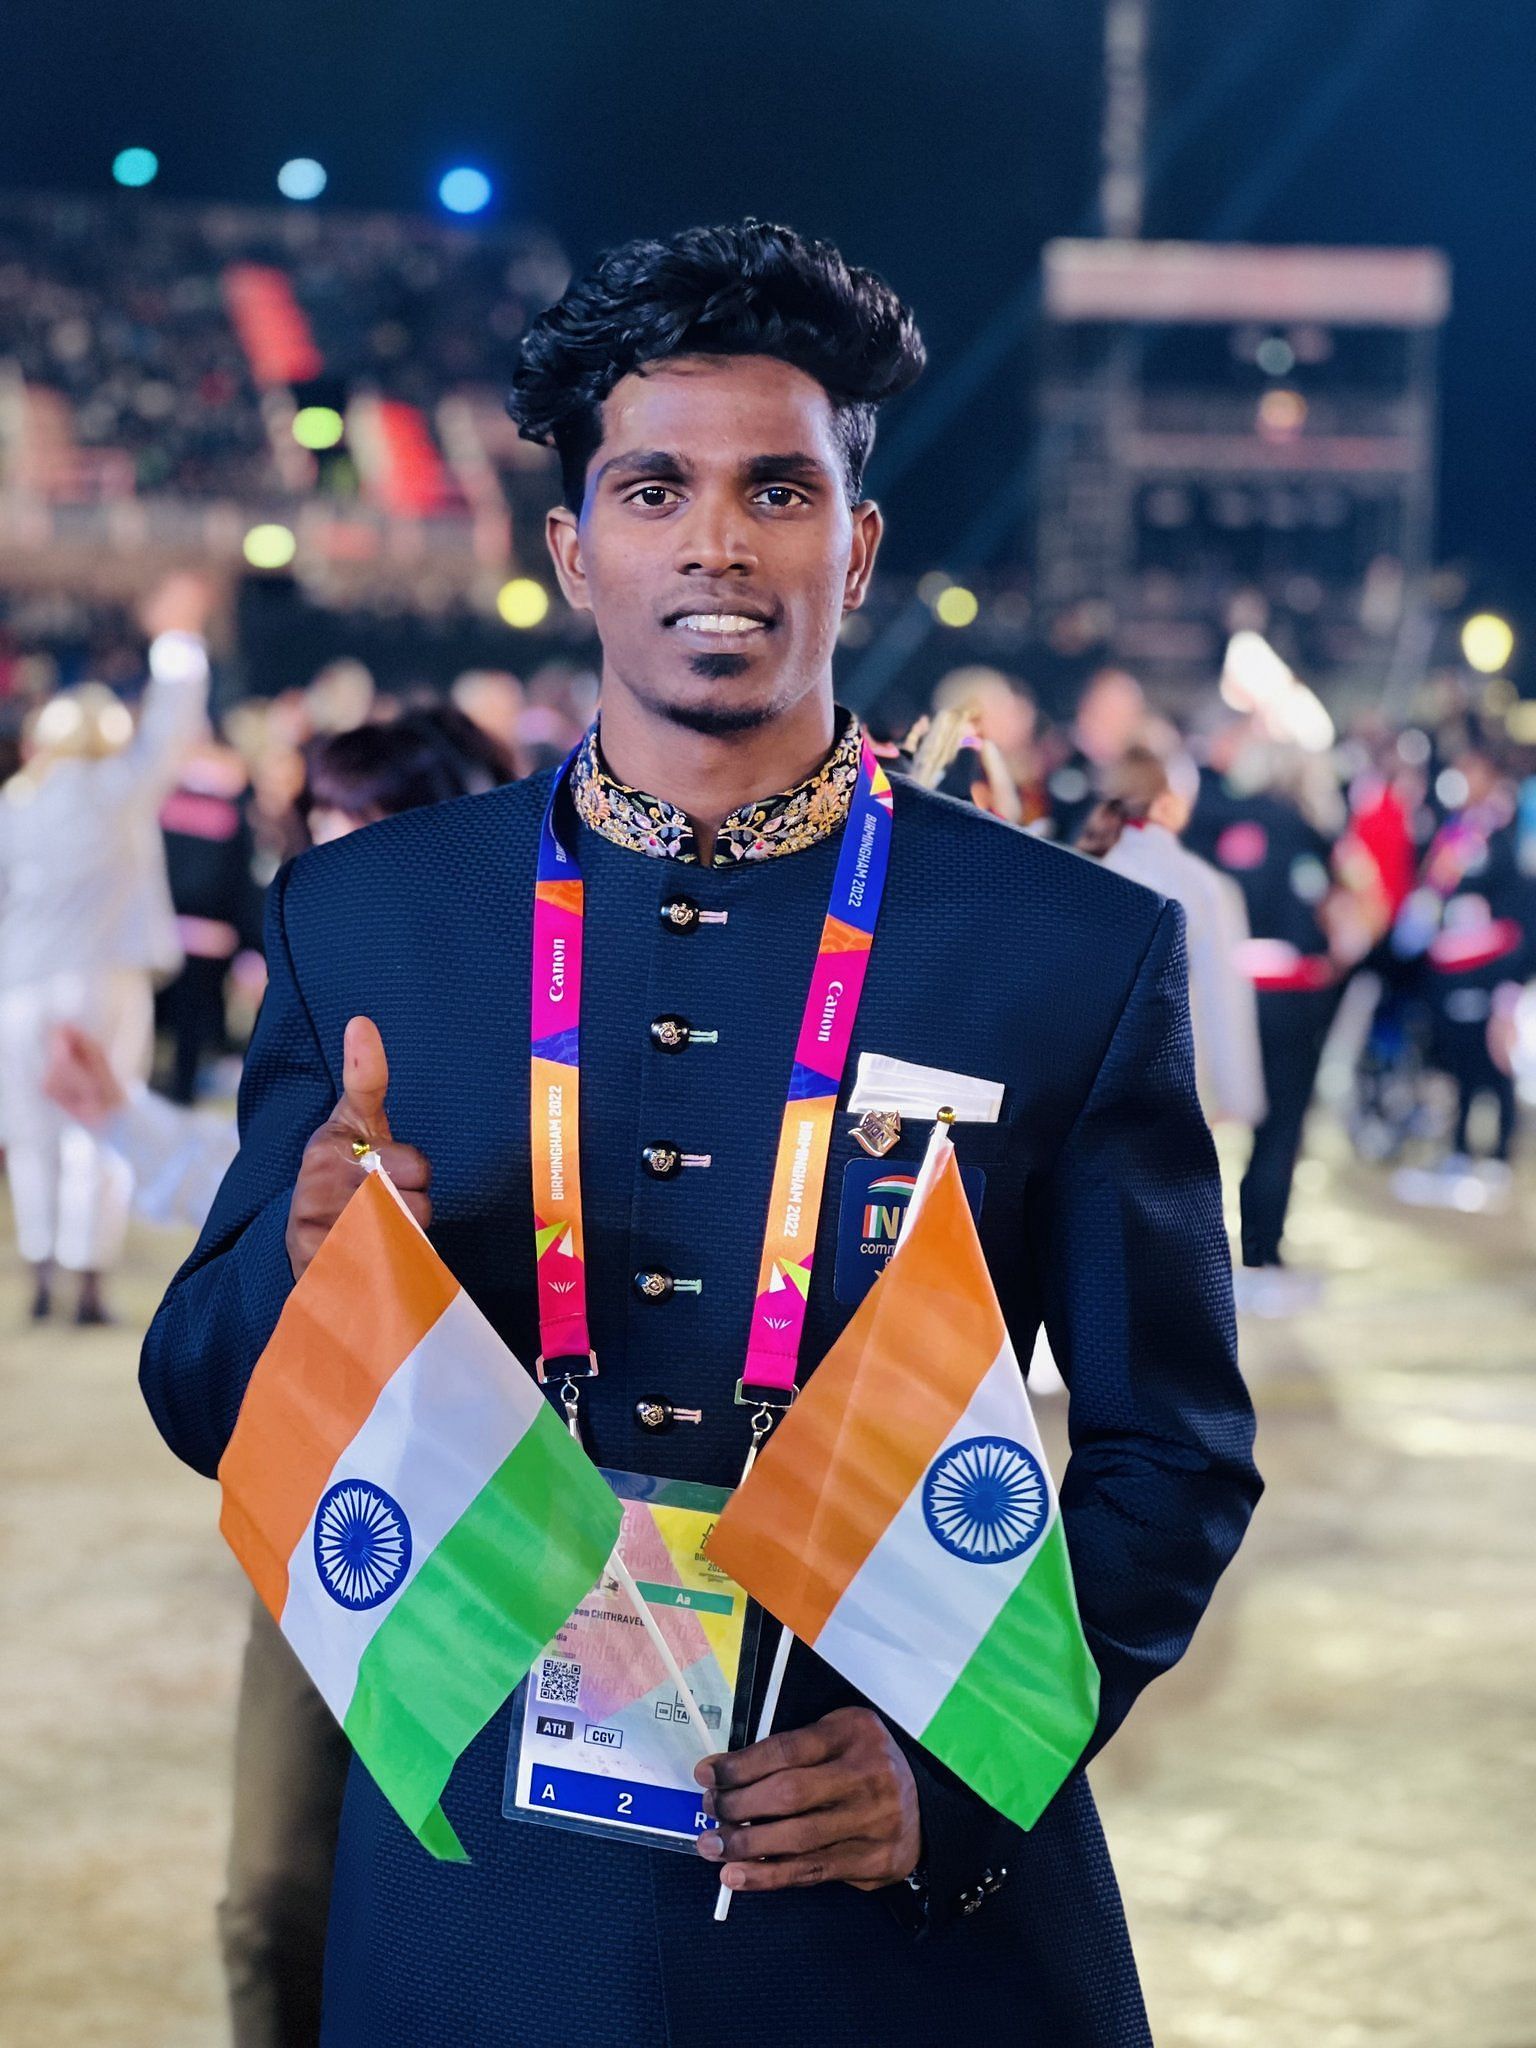 Long jumper Praveen Chitravel at the opening ceremony. (PC: Praveen Chitravel/Twitter)